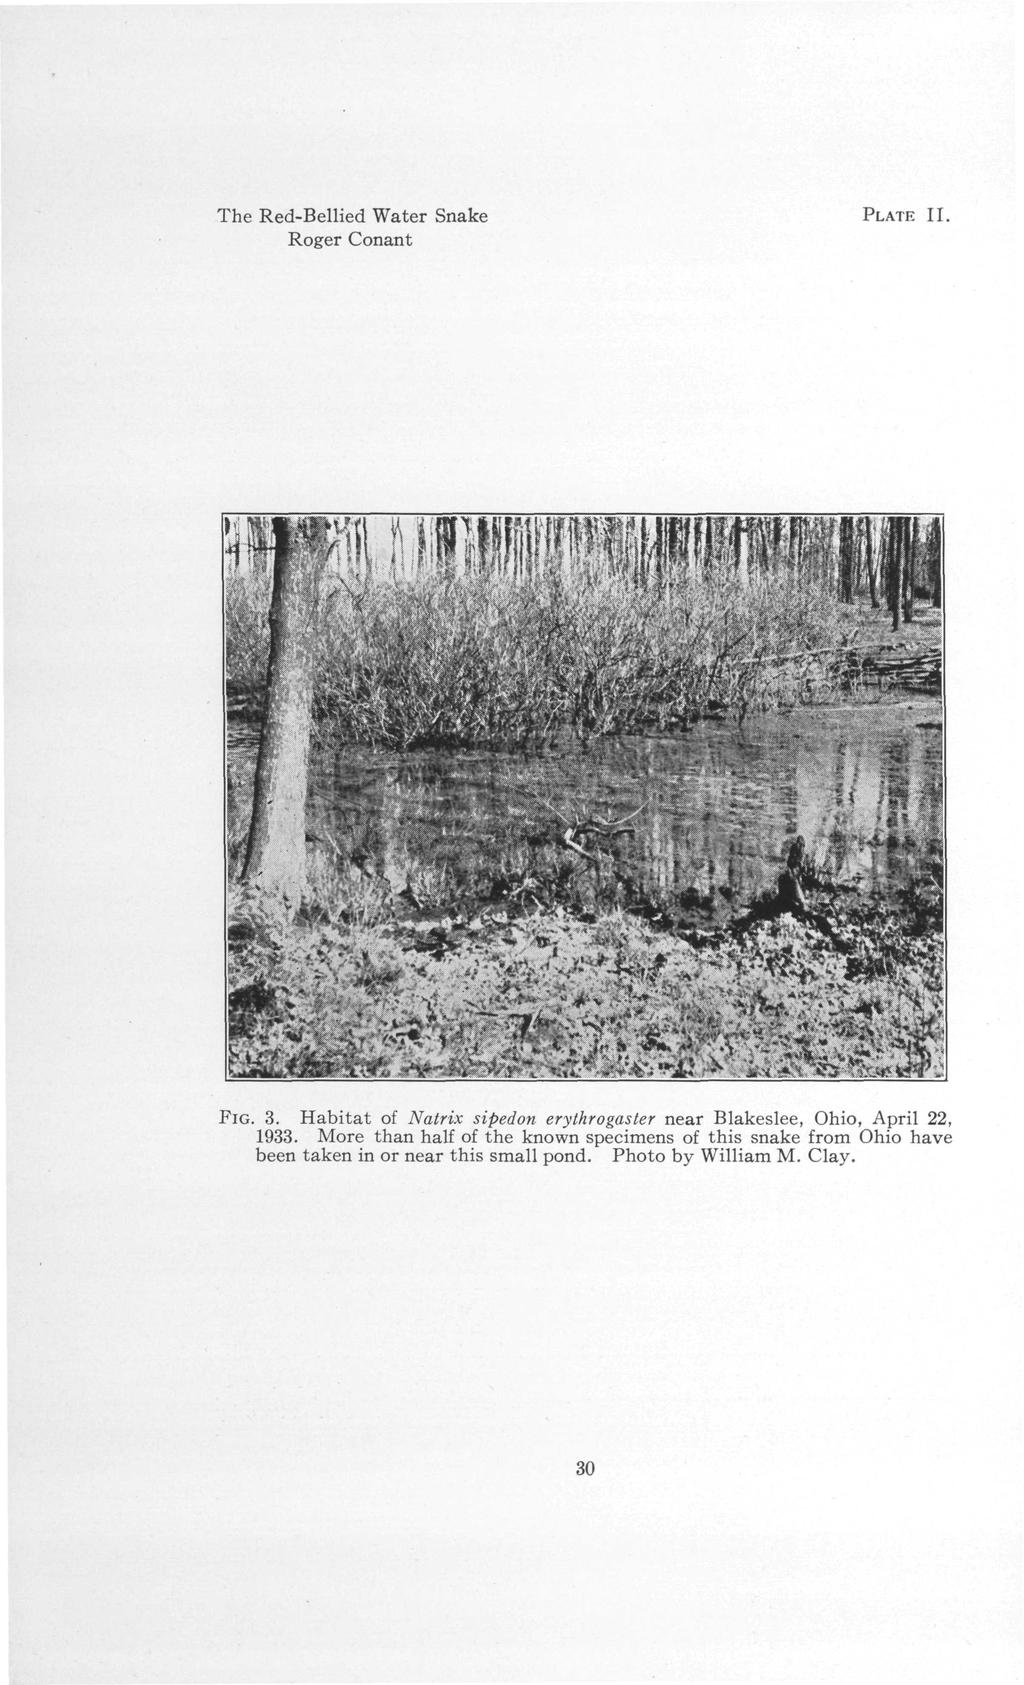 The Red-Bellied Water Snake Roger Conant PLATE II. FIG. 3. Habitat of Natrix sipedon erythrogaster near Blakeslee, Ohio, April 22, 1933.